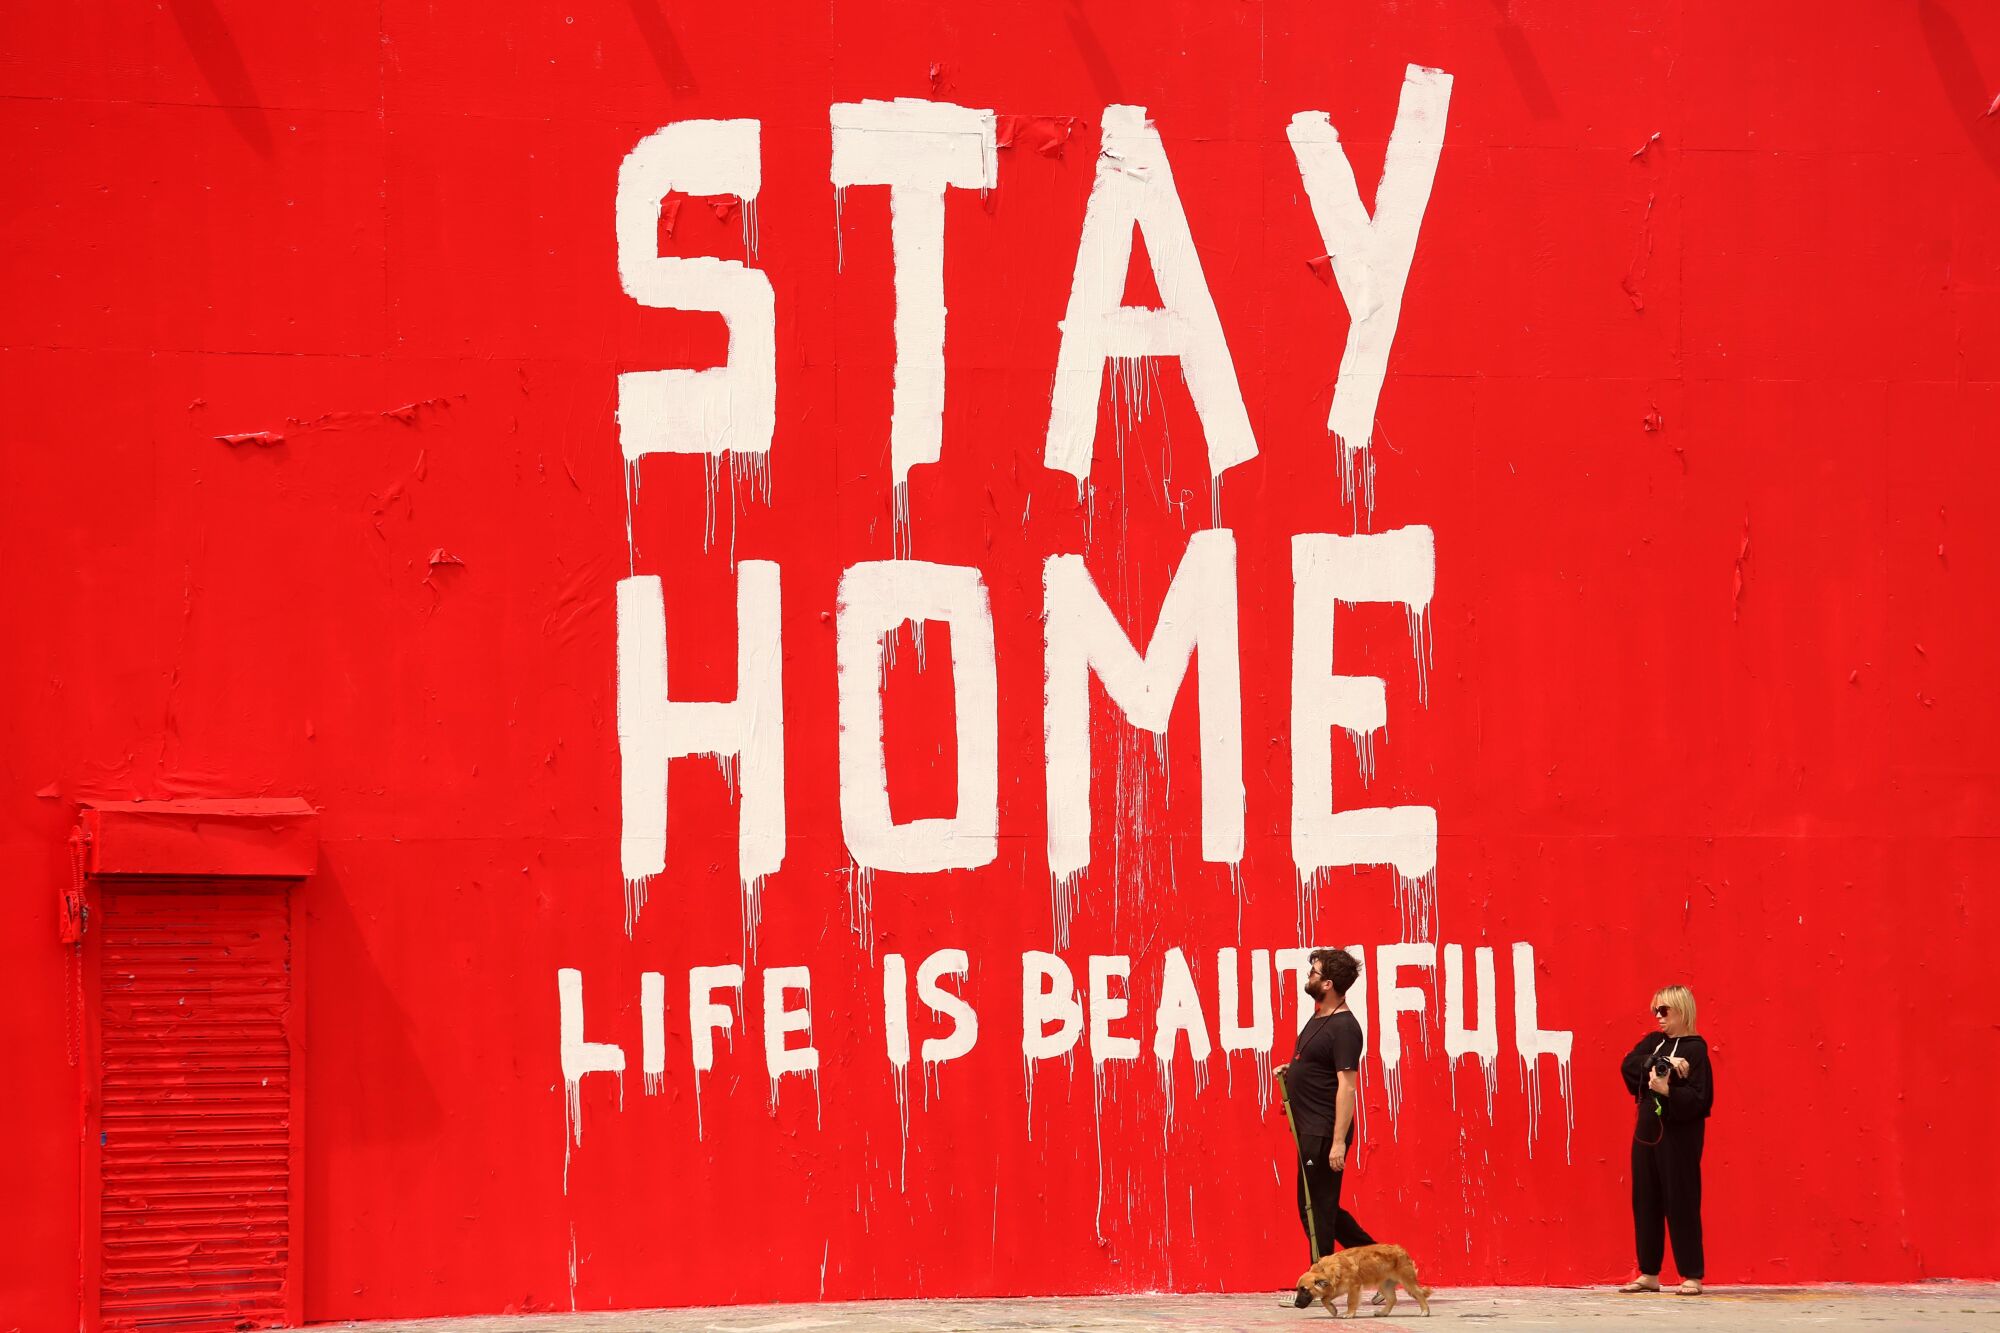 A message painted on a wall on La Brea Avenue on March 31 reads: "Stay home. Life is beautiful."